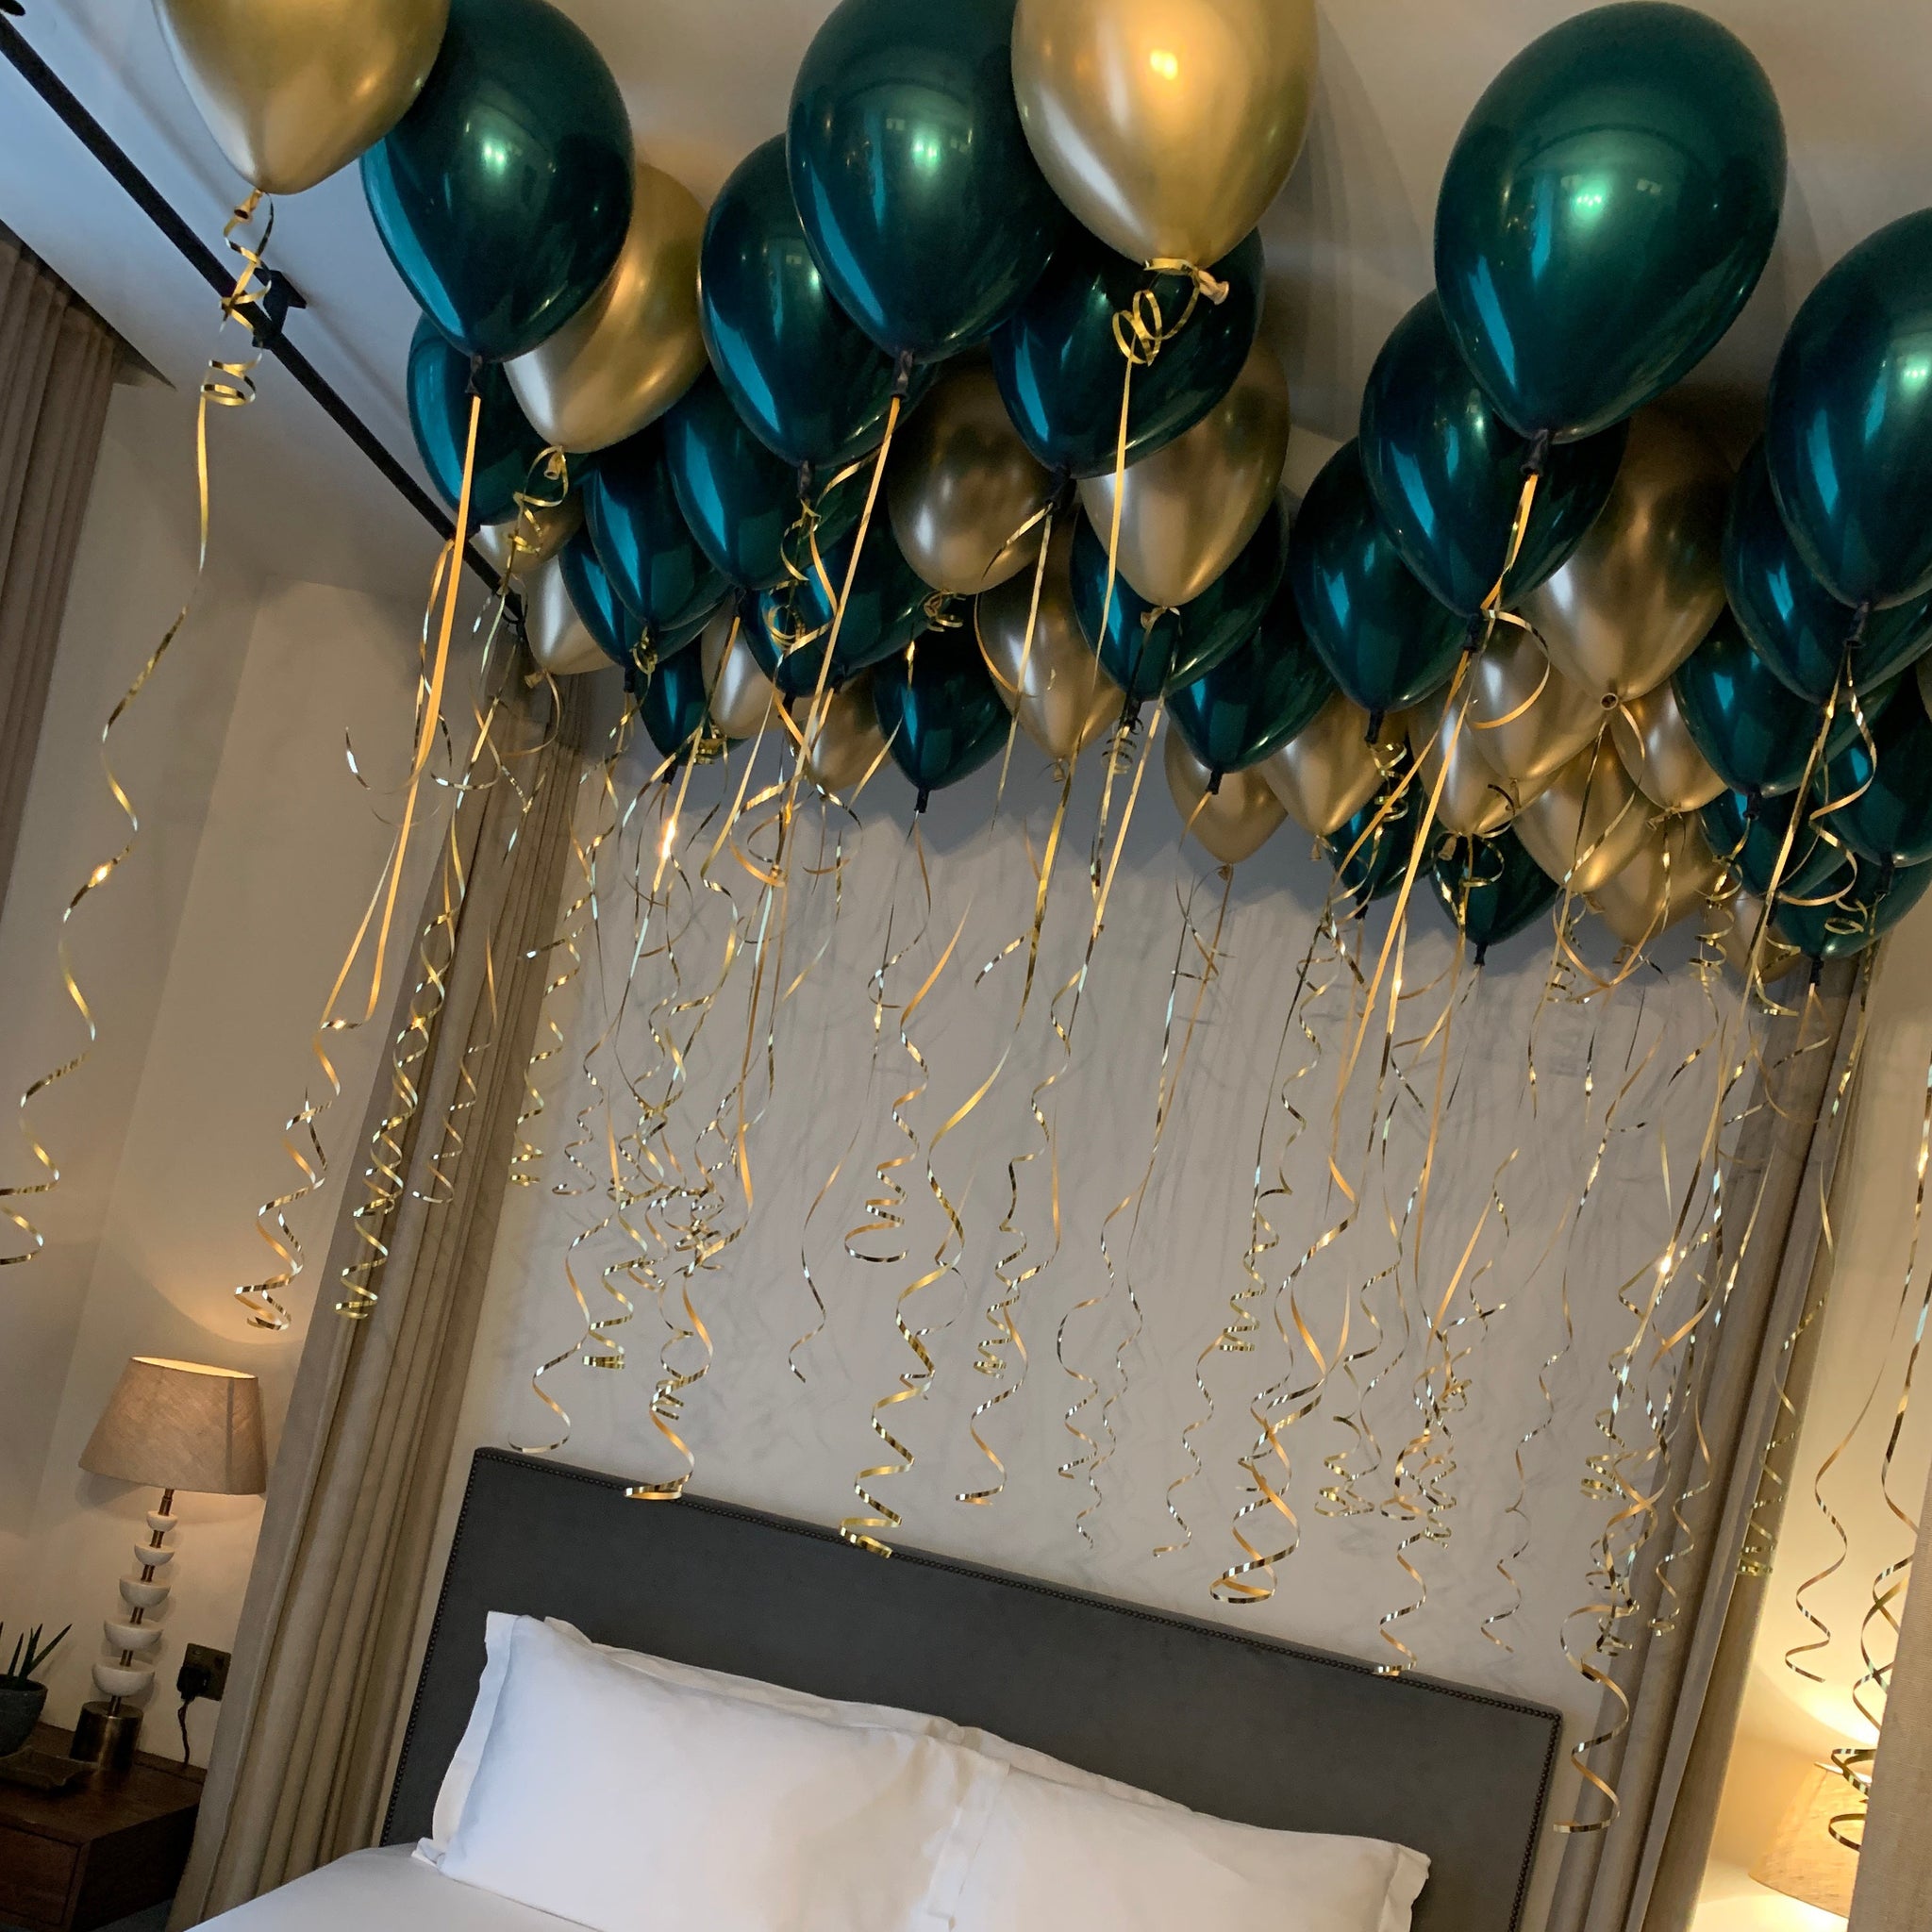 Ceiling Balloons Hotel Balloons